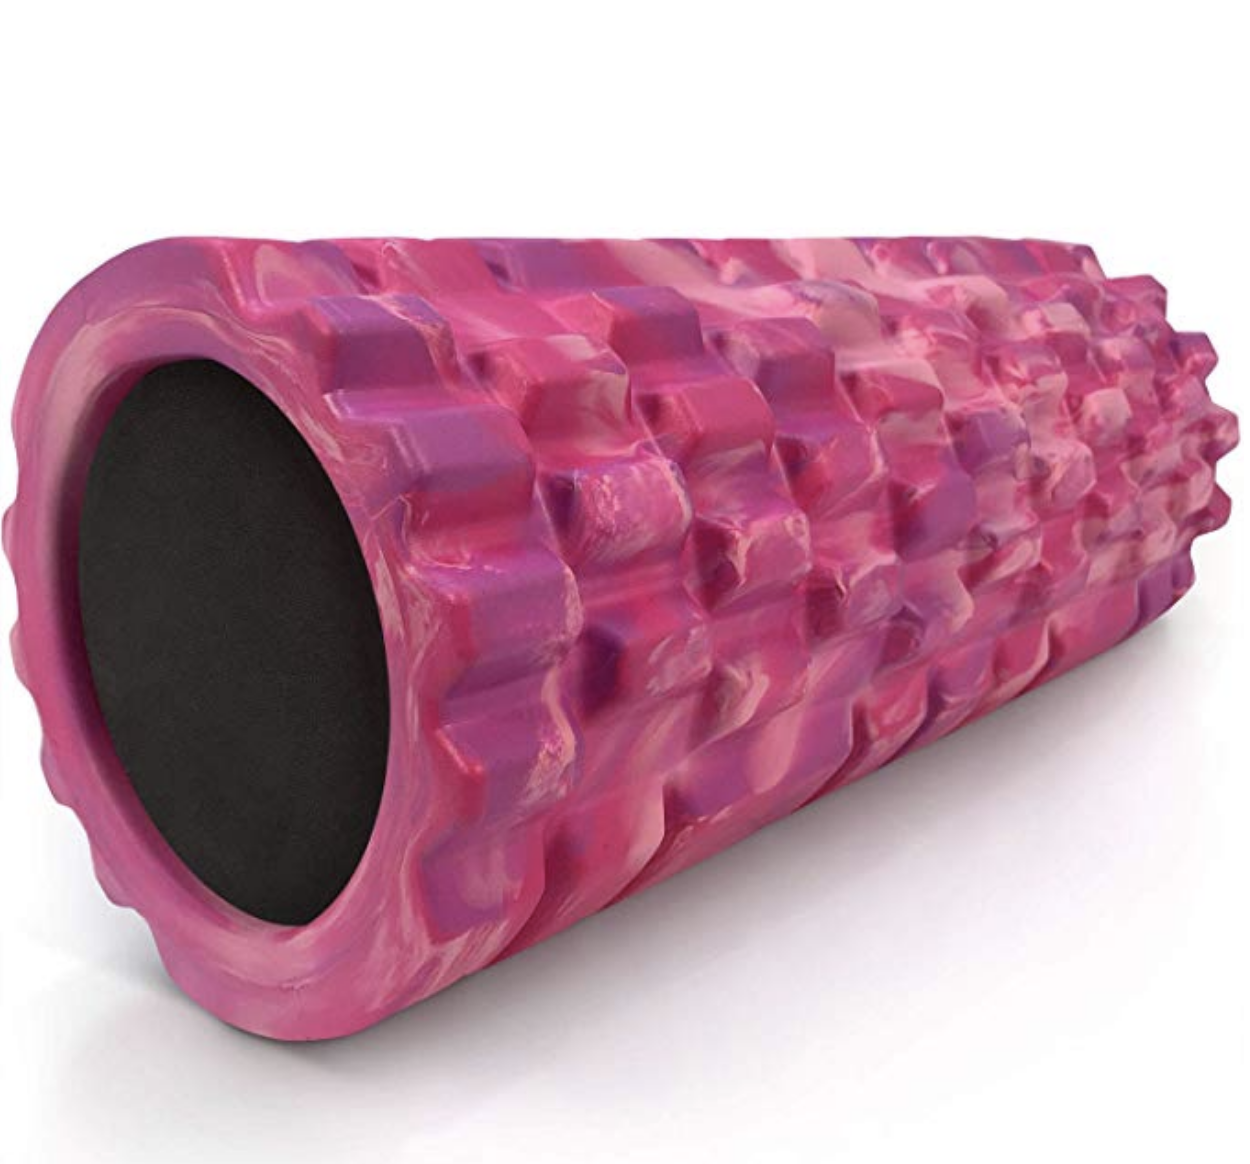  colorful, pink foam roller for massaging fascia and muscle tissue. Great for athletes, aerialists and dancers. 